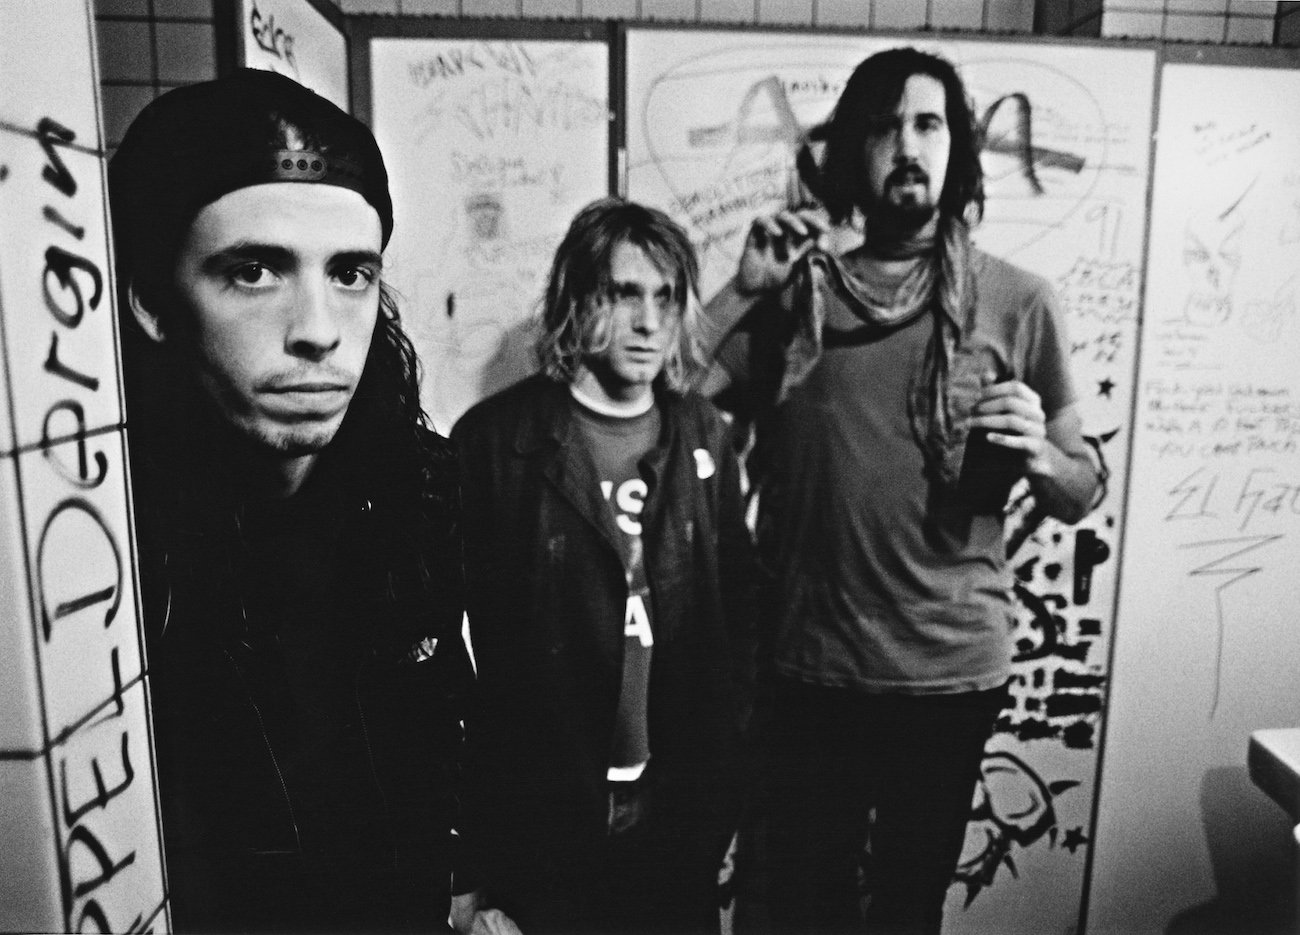 Dave Grohl and Nirvana in Germany, 1991.